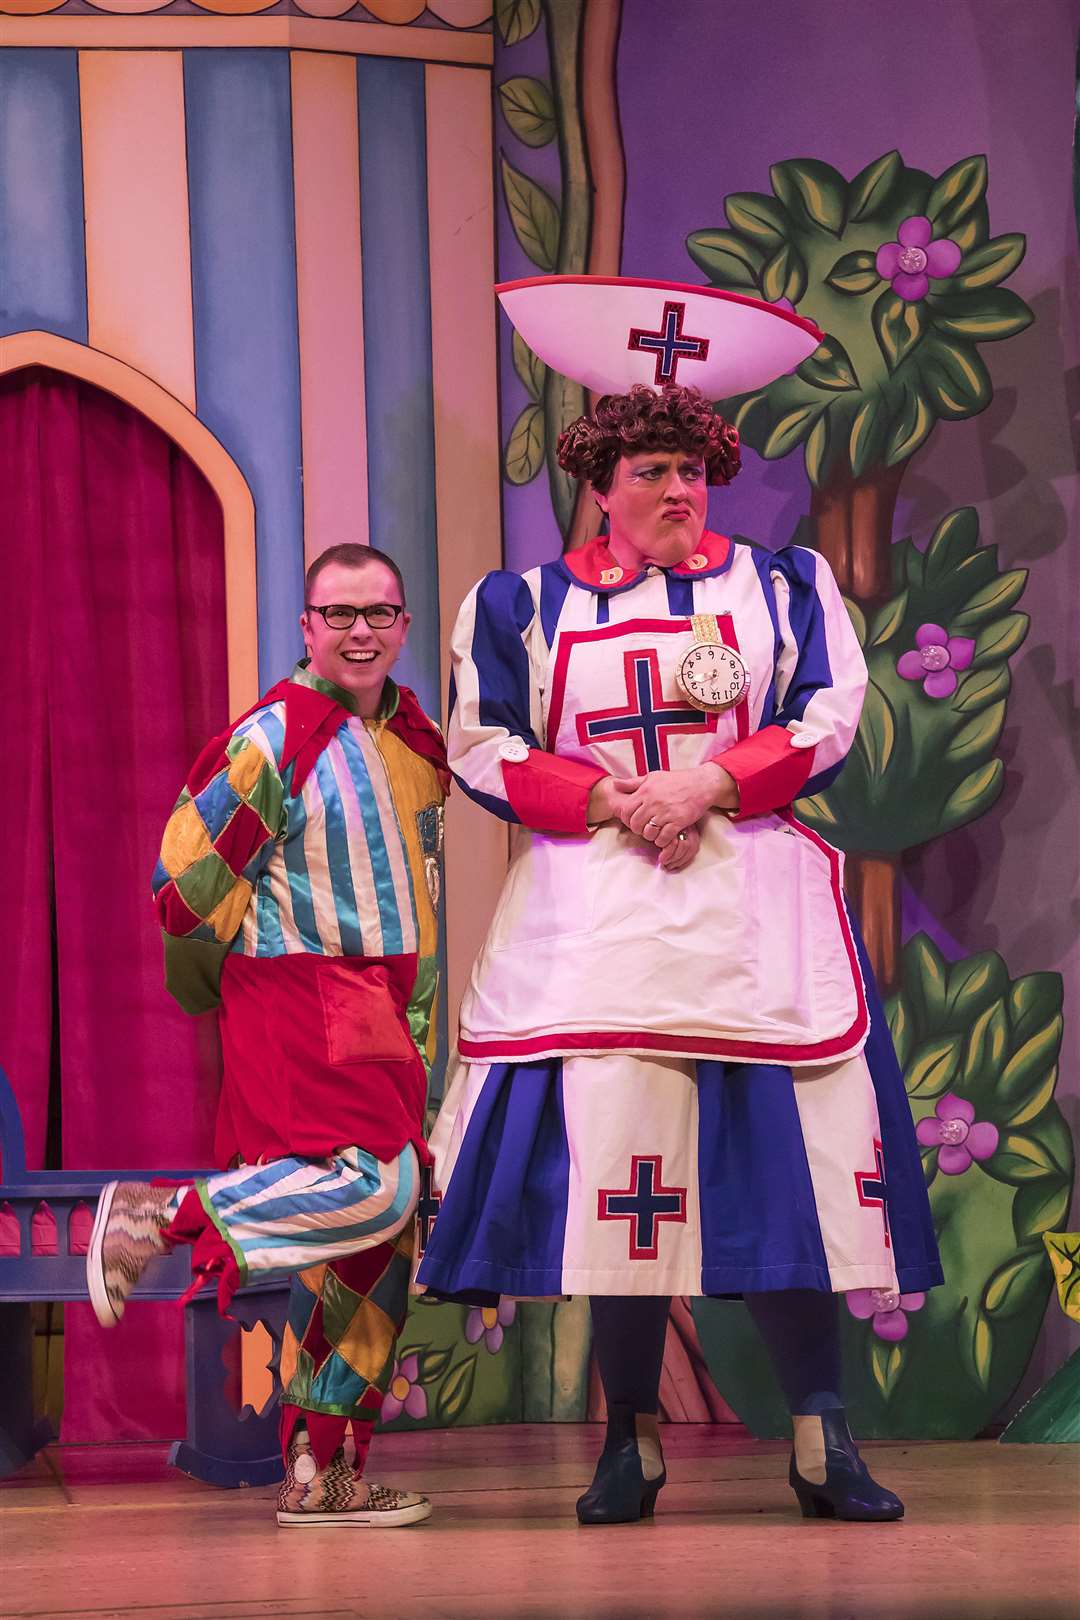 Joe Tracini and Ian Good performing together in Sleeping Beauty at the Central Theatre in 2017 (1946899)